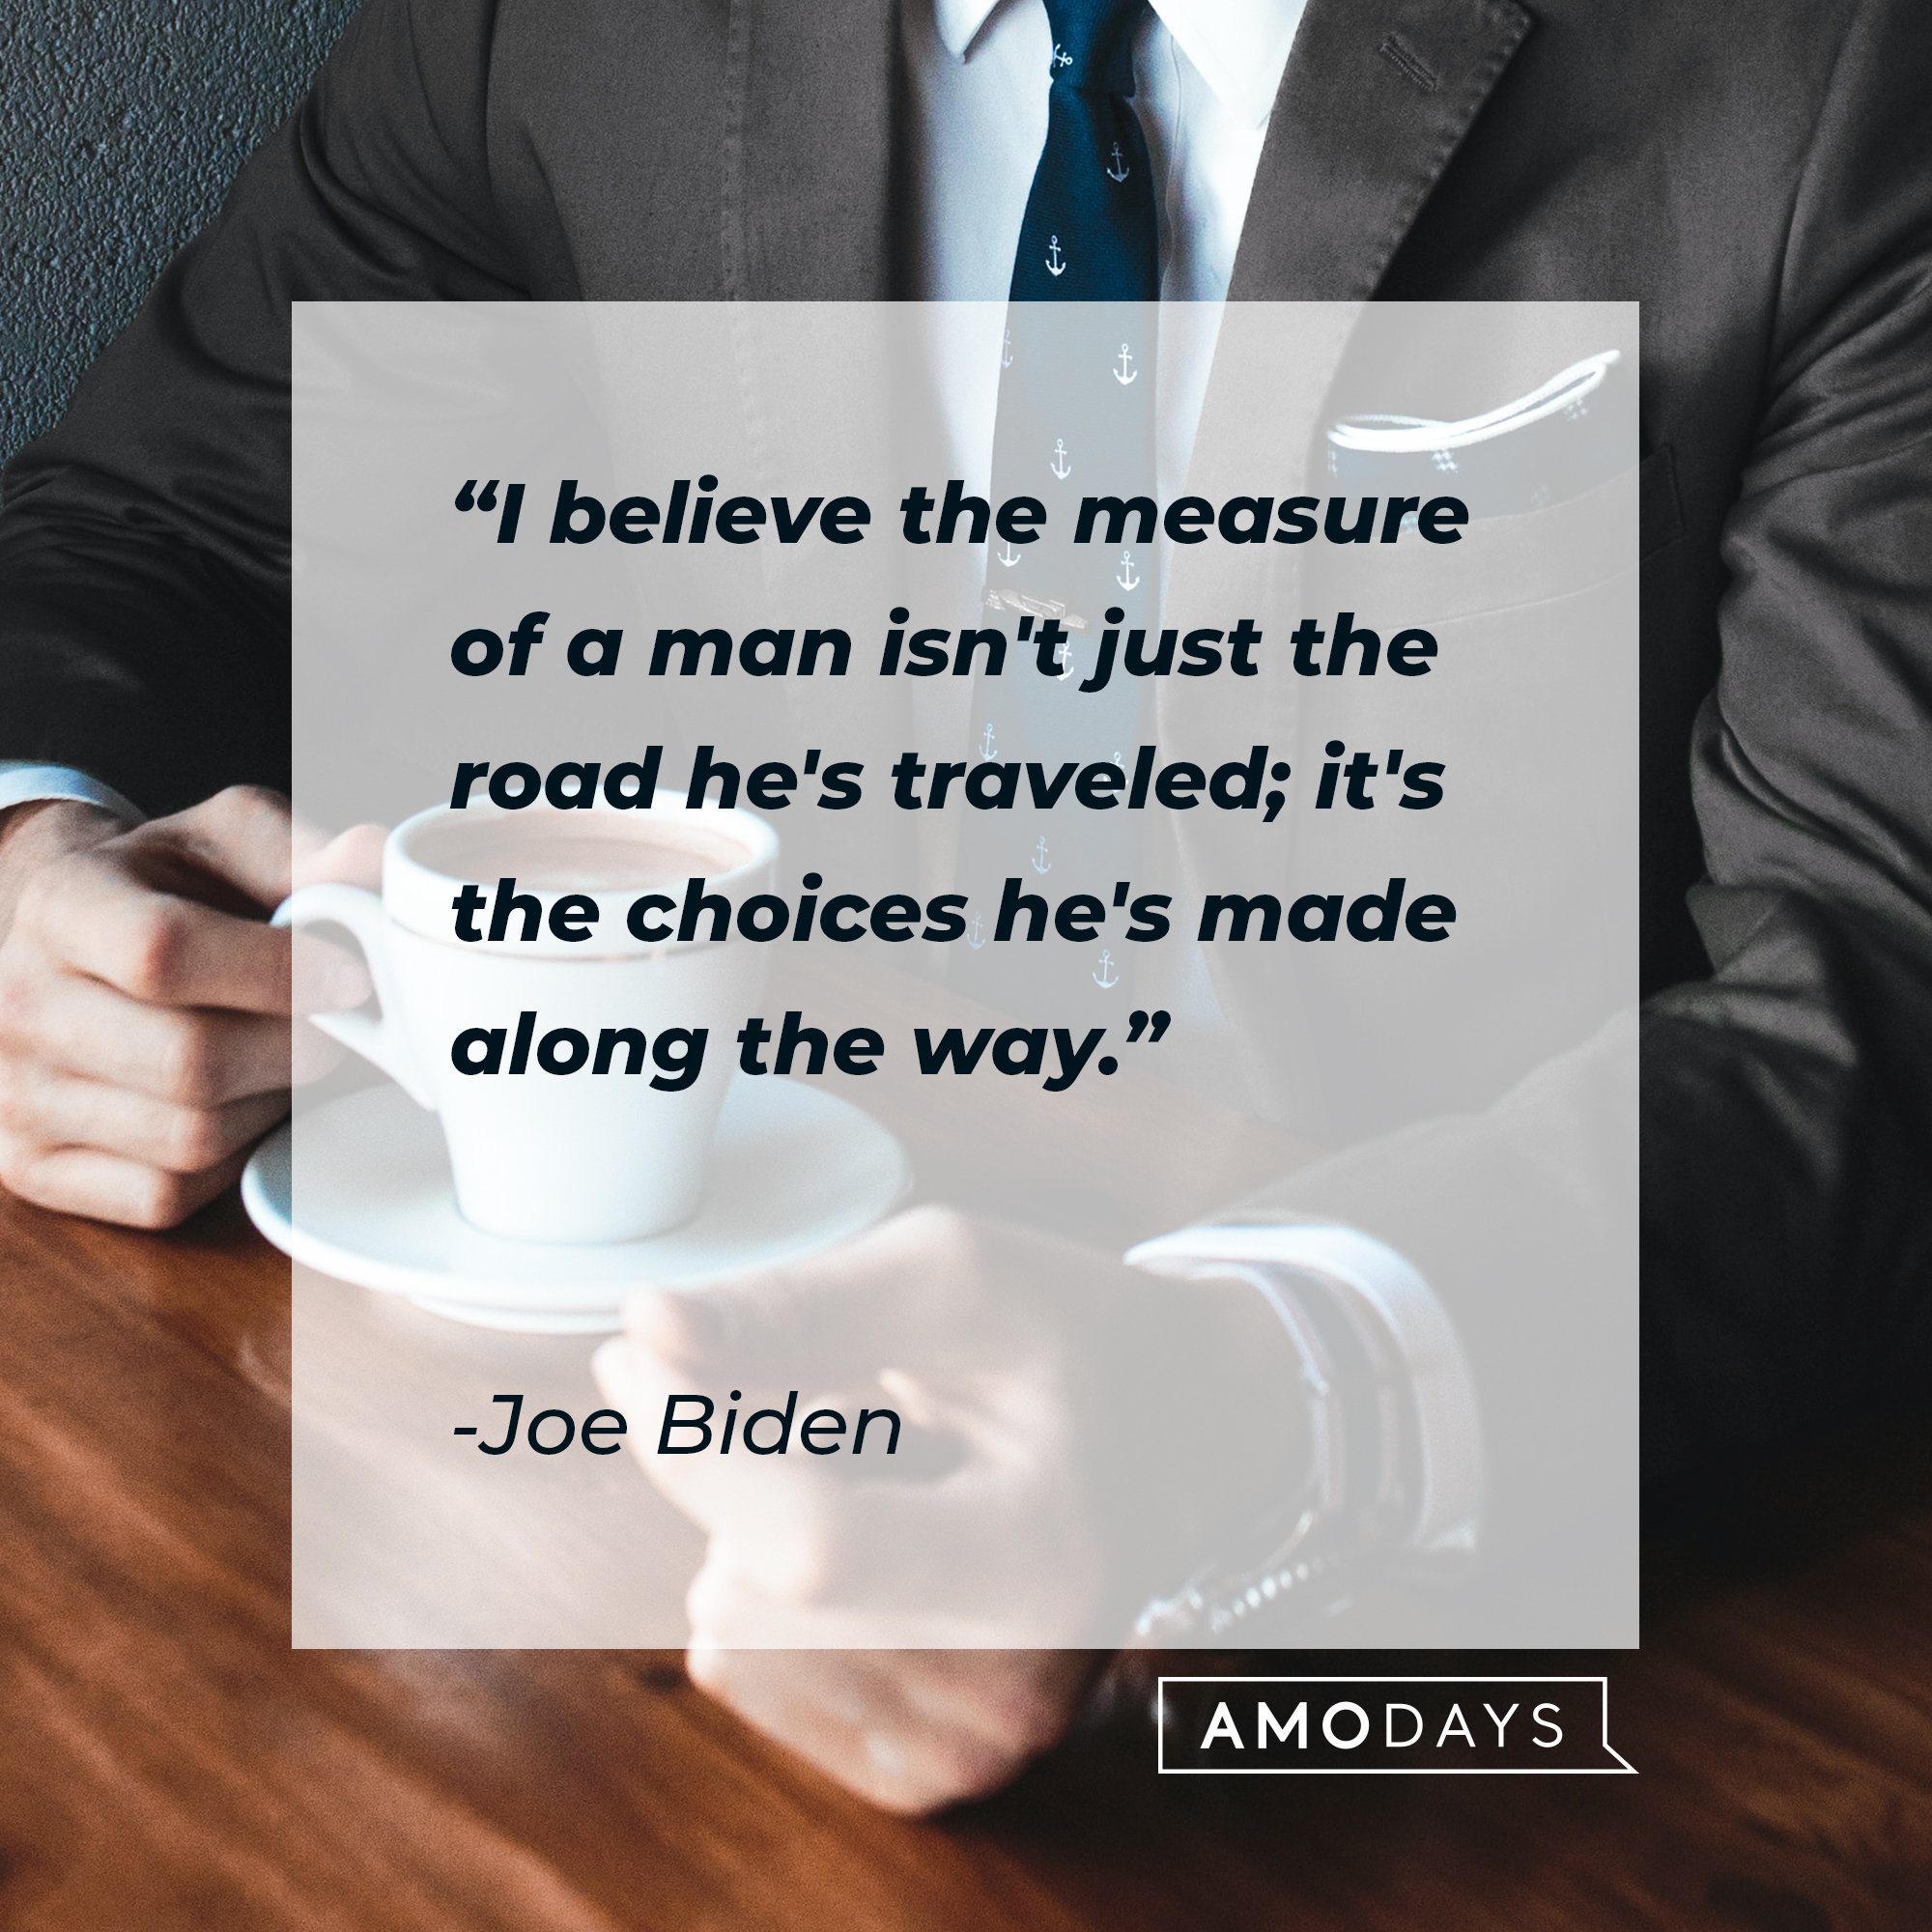 Joe Biden’s quote: "I believe the measure of a man isn't just the road he's traveled; it's the choices he's made along the way." | Image: AmoDays